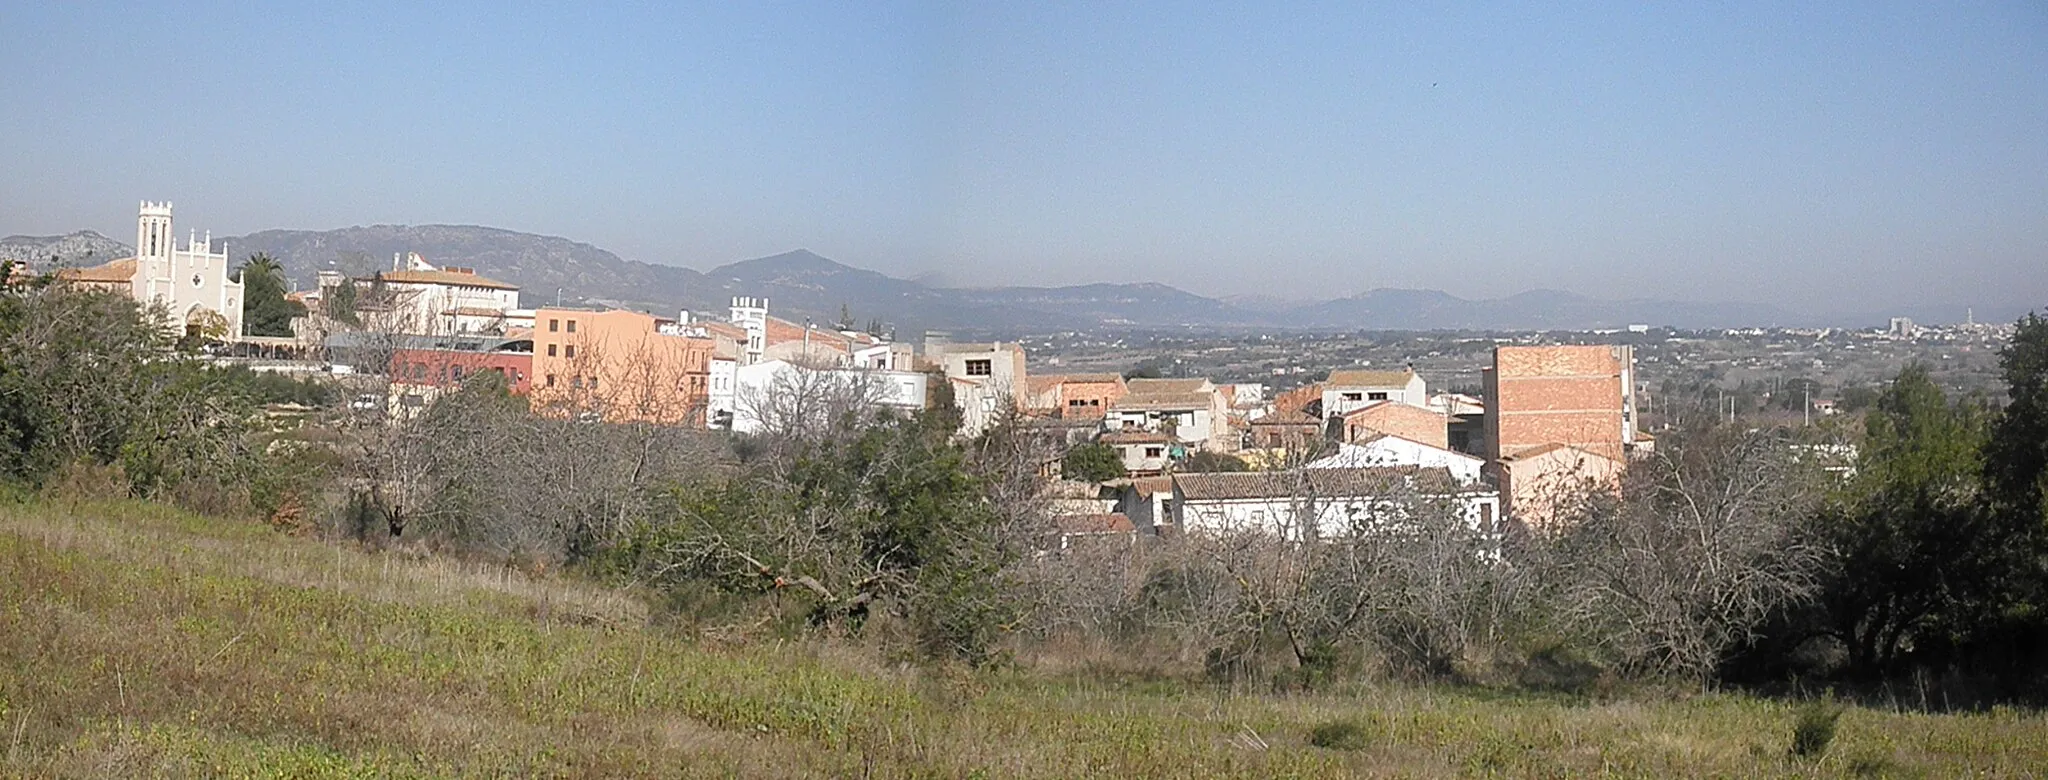 Photo showing: The panoramic view of El Milà from a nearby hill.